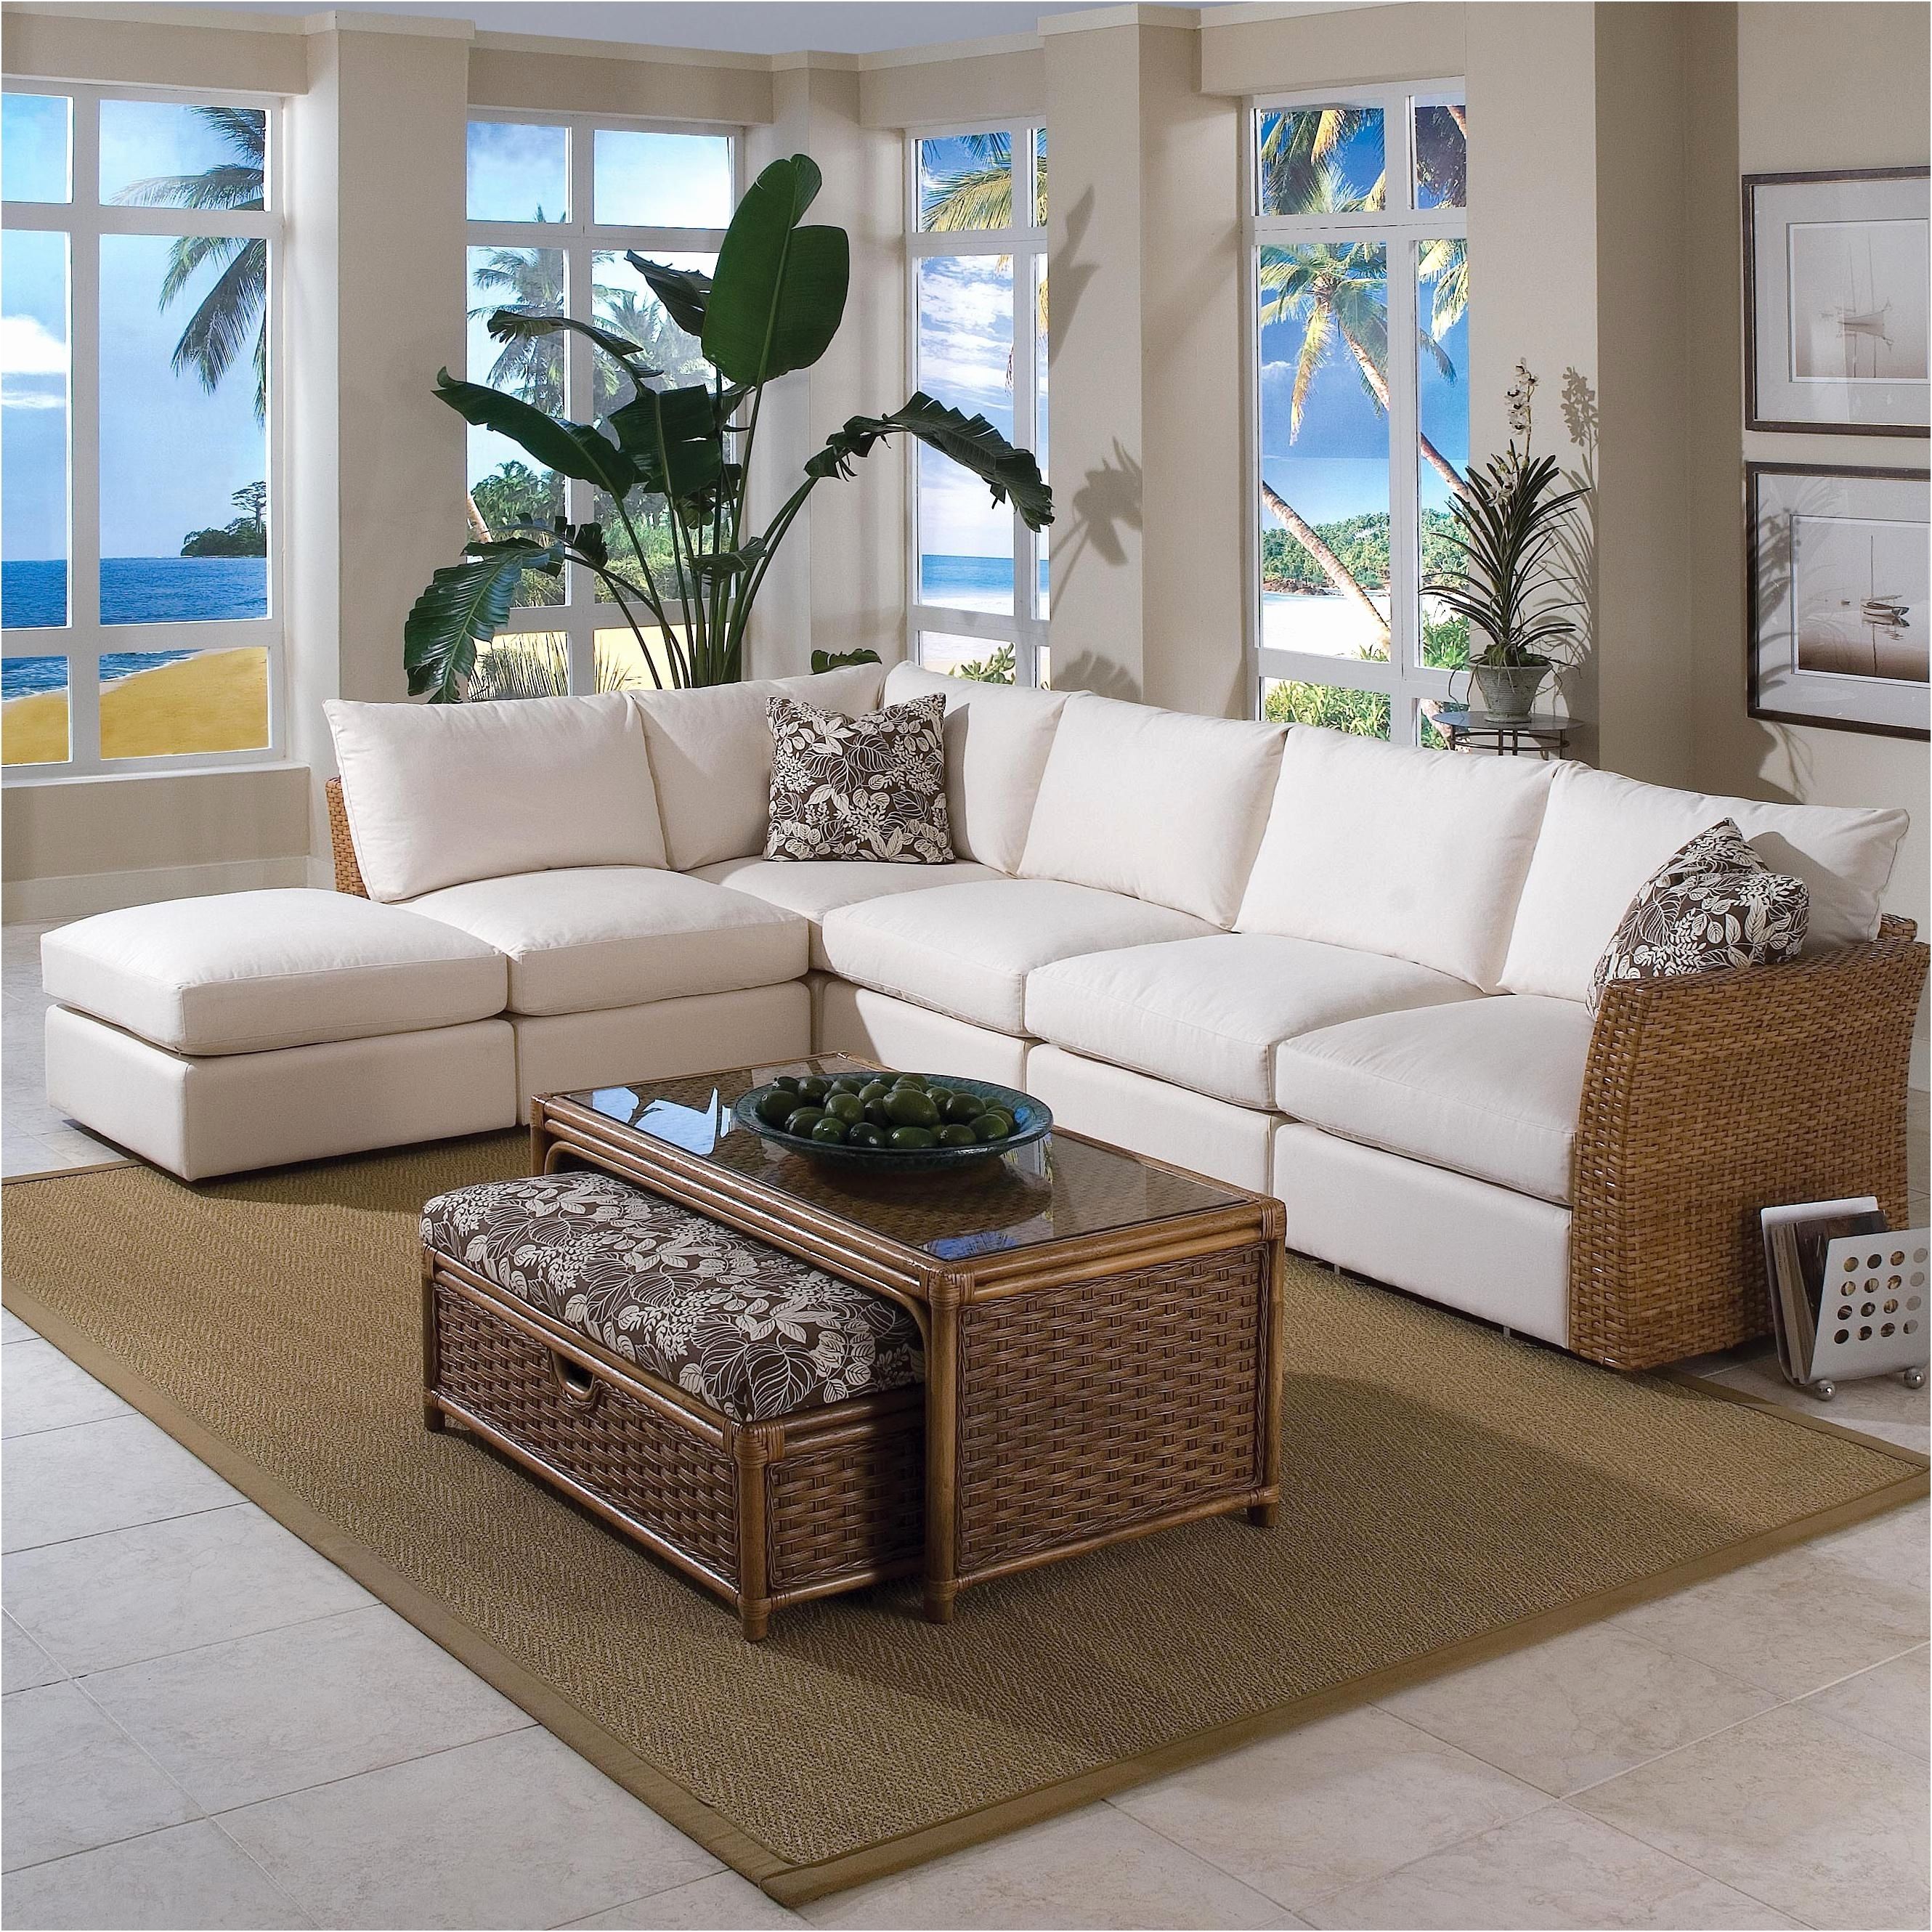 Awesome Cheap Sectional Sofas Awesome – Intuisiblog In Greenville Nc Sectional Sofas (Photo 1 of 10)